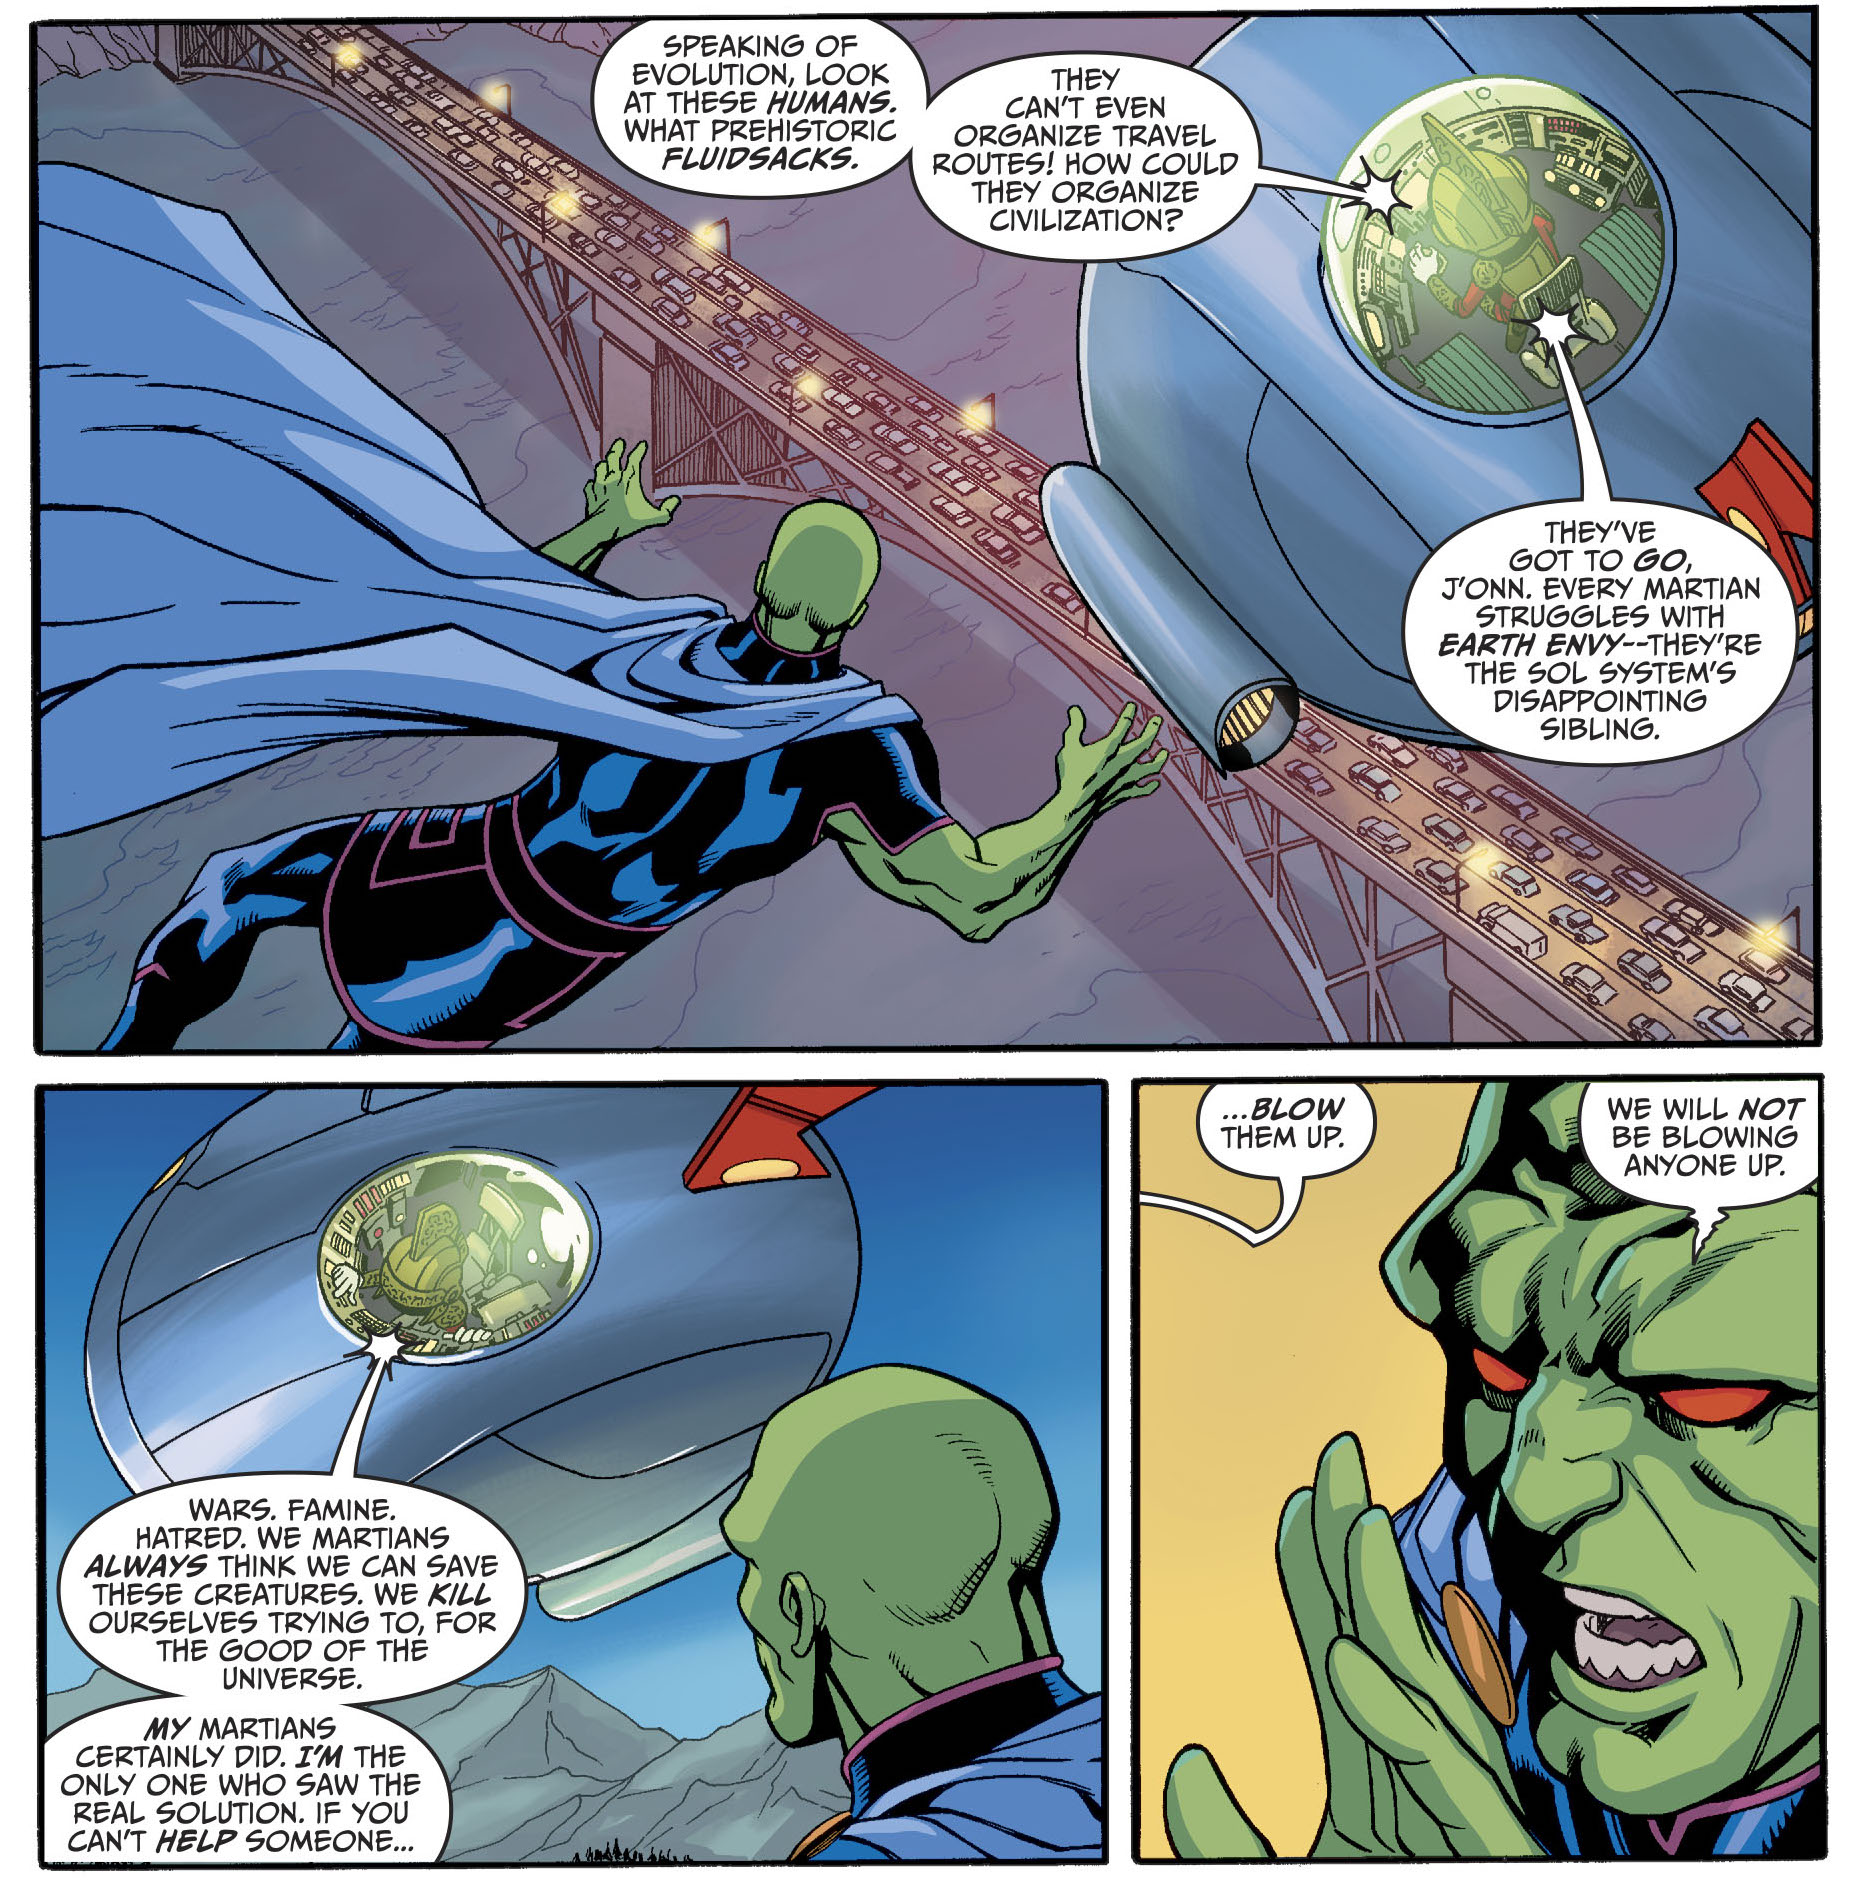 Marvin The Martian And The Martian Manhunter Can’t Agree Whether Humanity Deserves To Exist